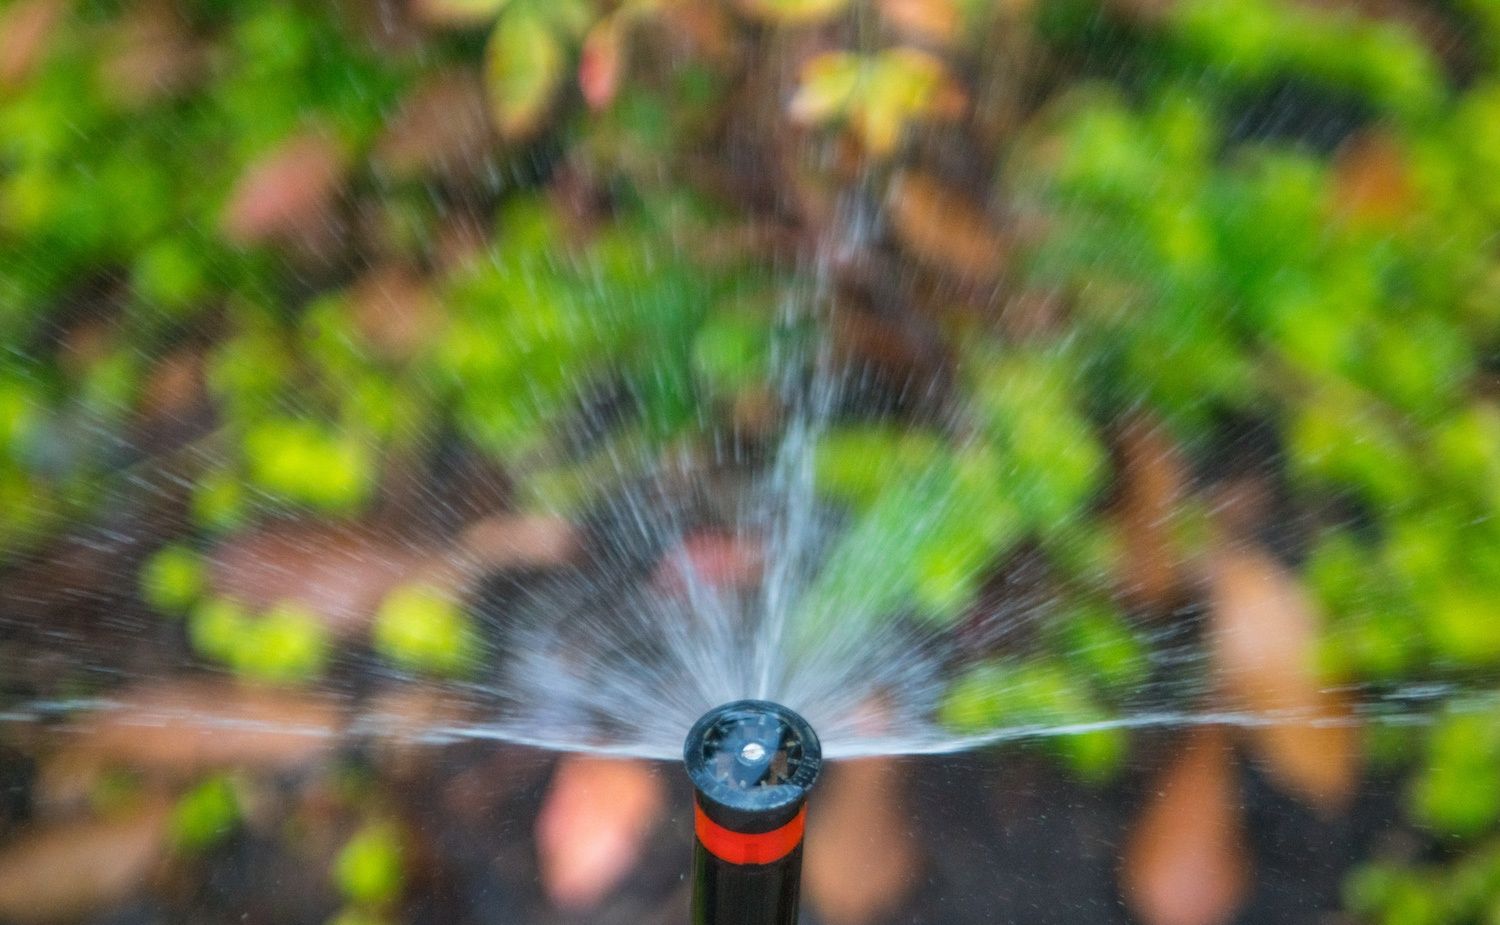 irrigation sprinkler to protect from drought